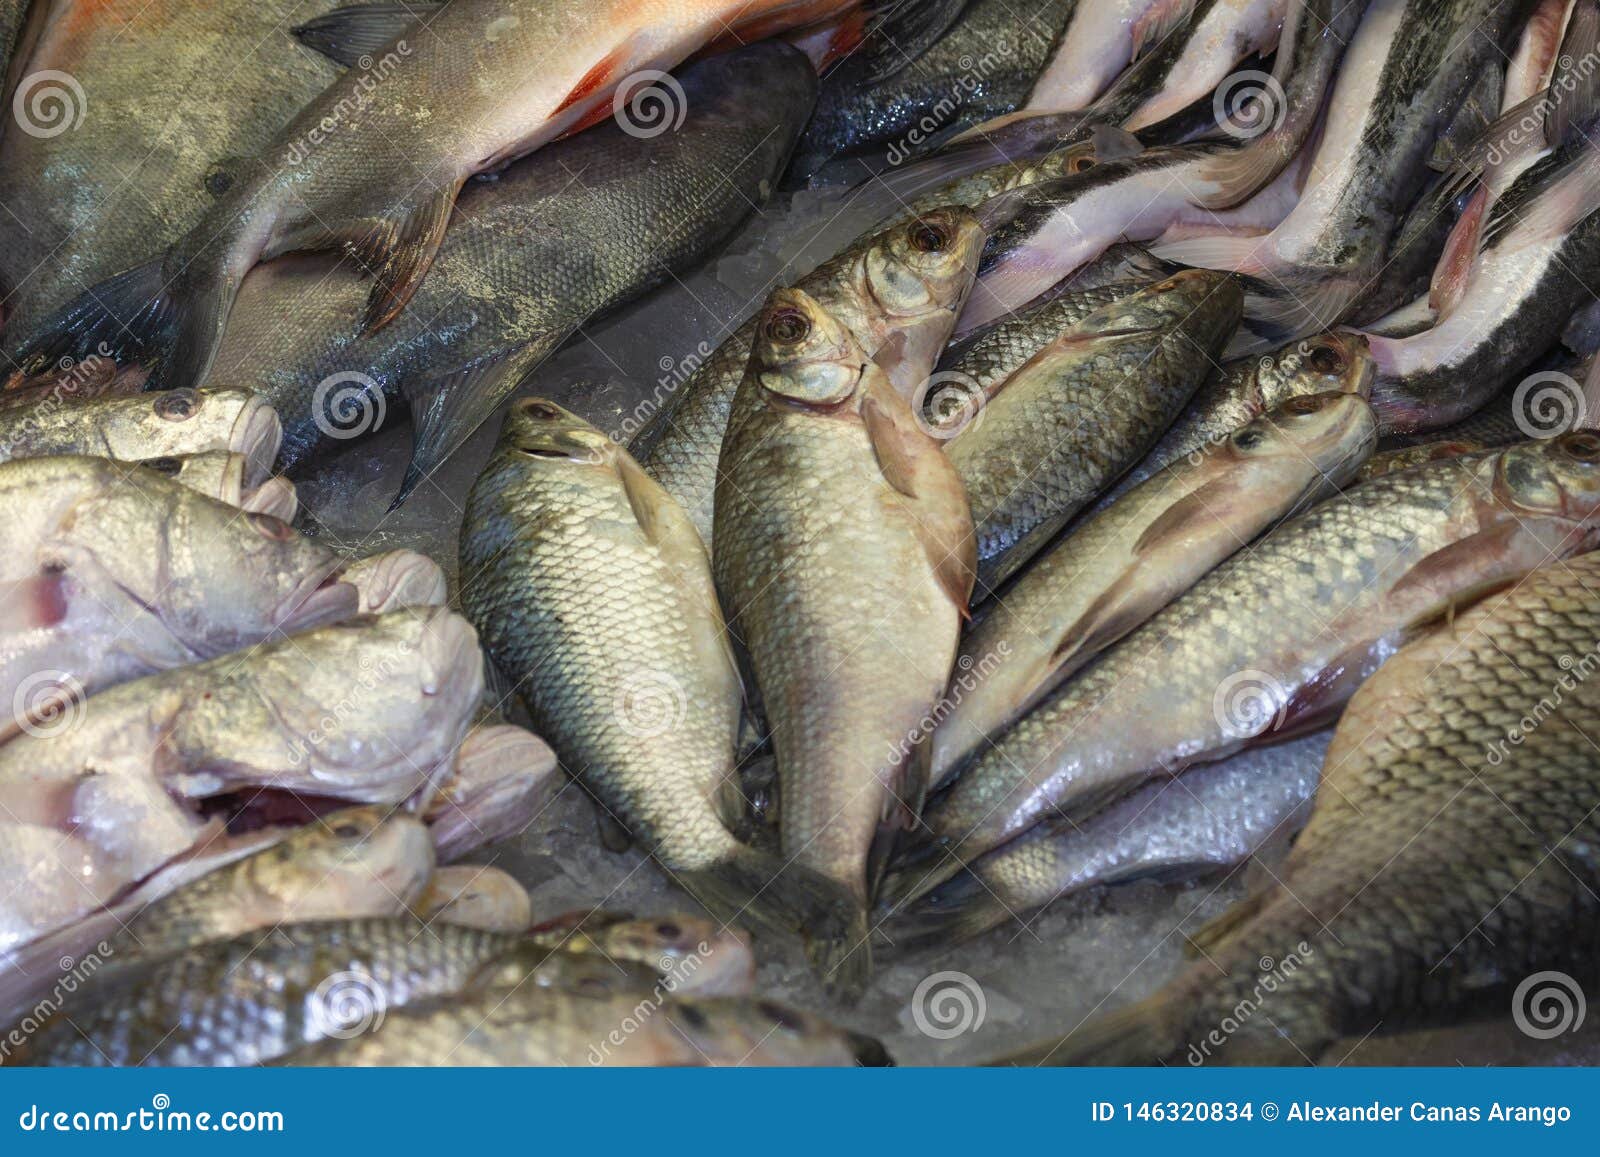 frozen fish food for sale